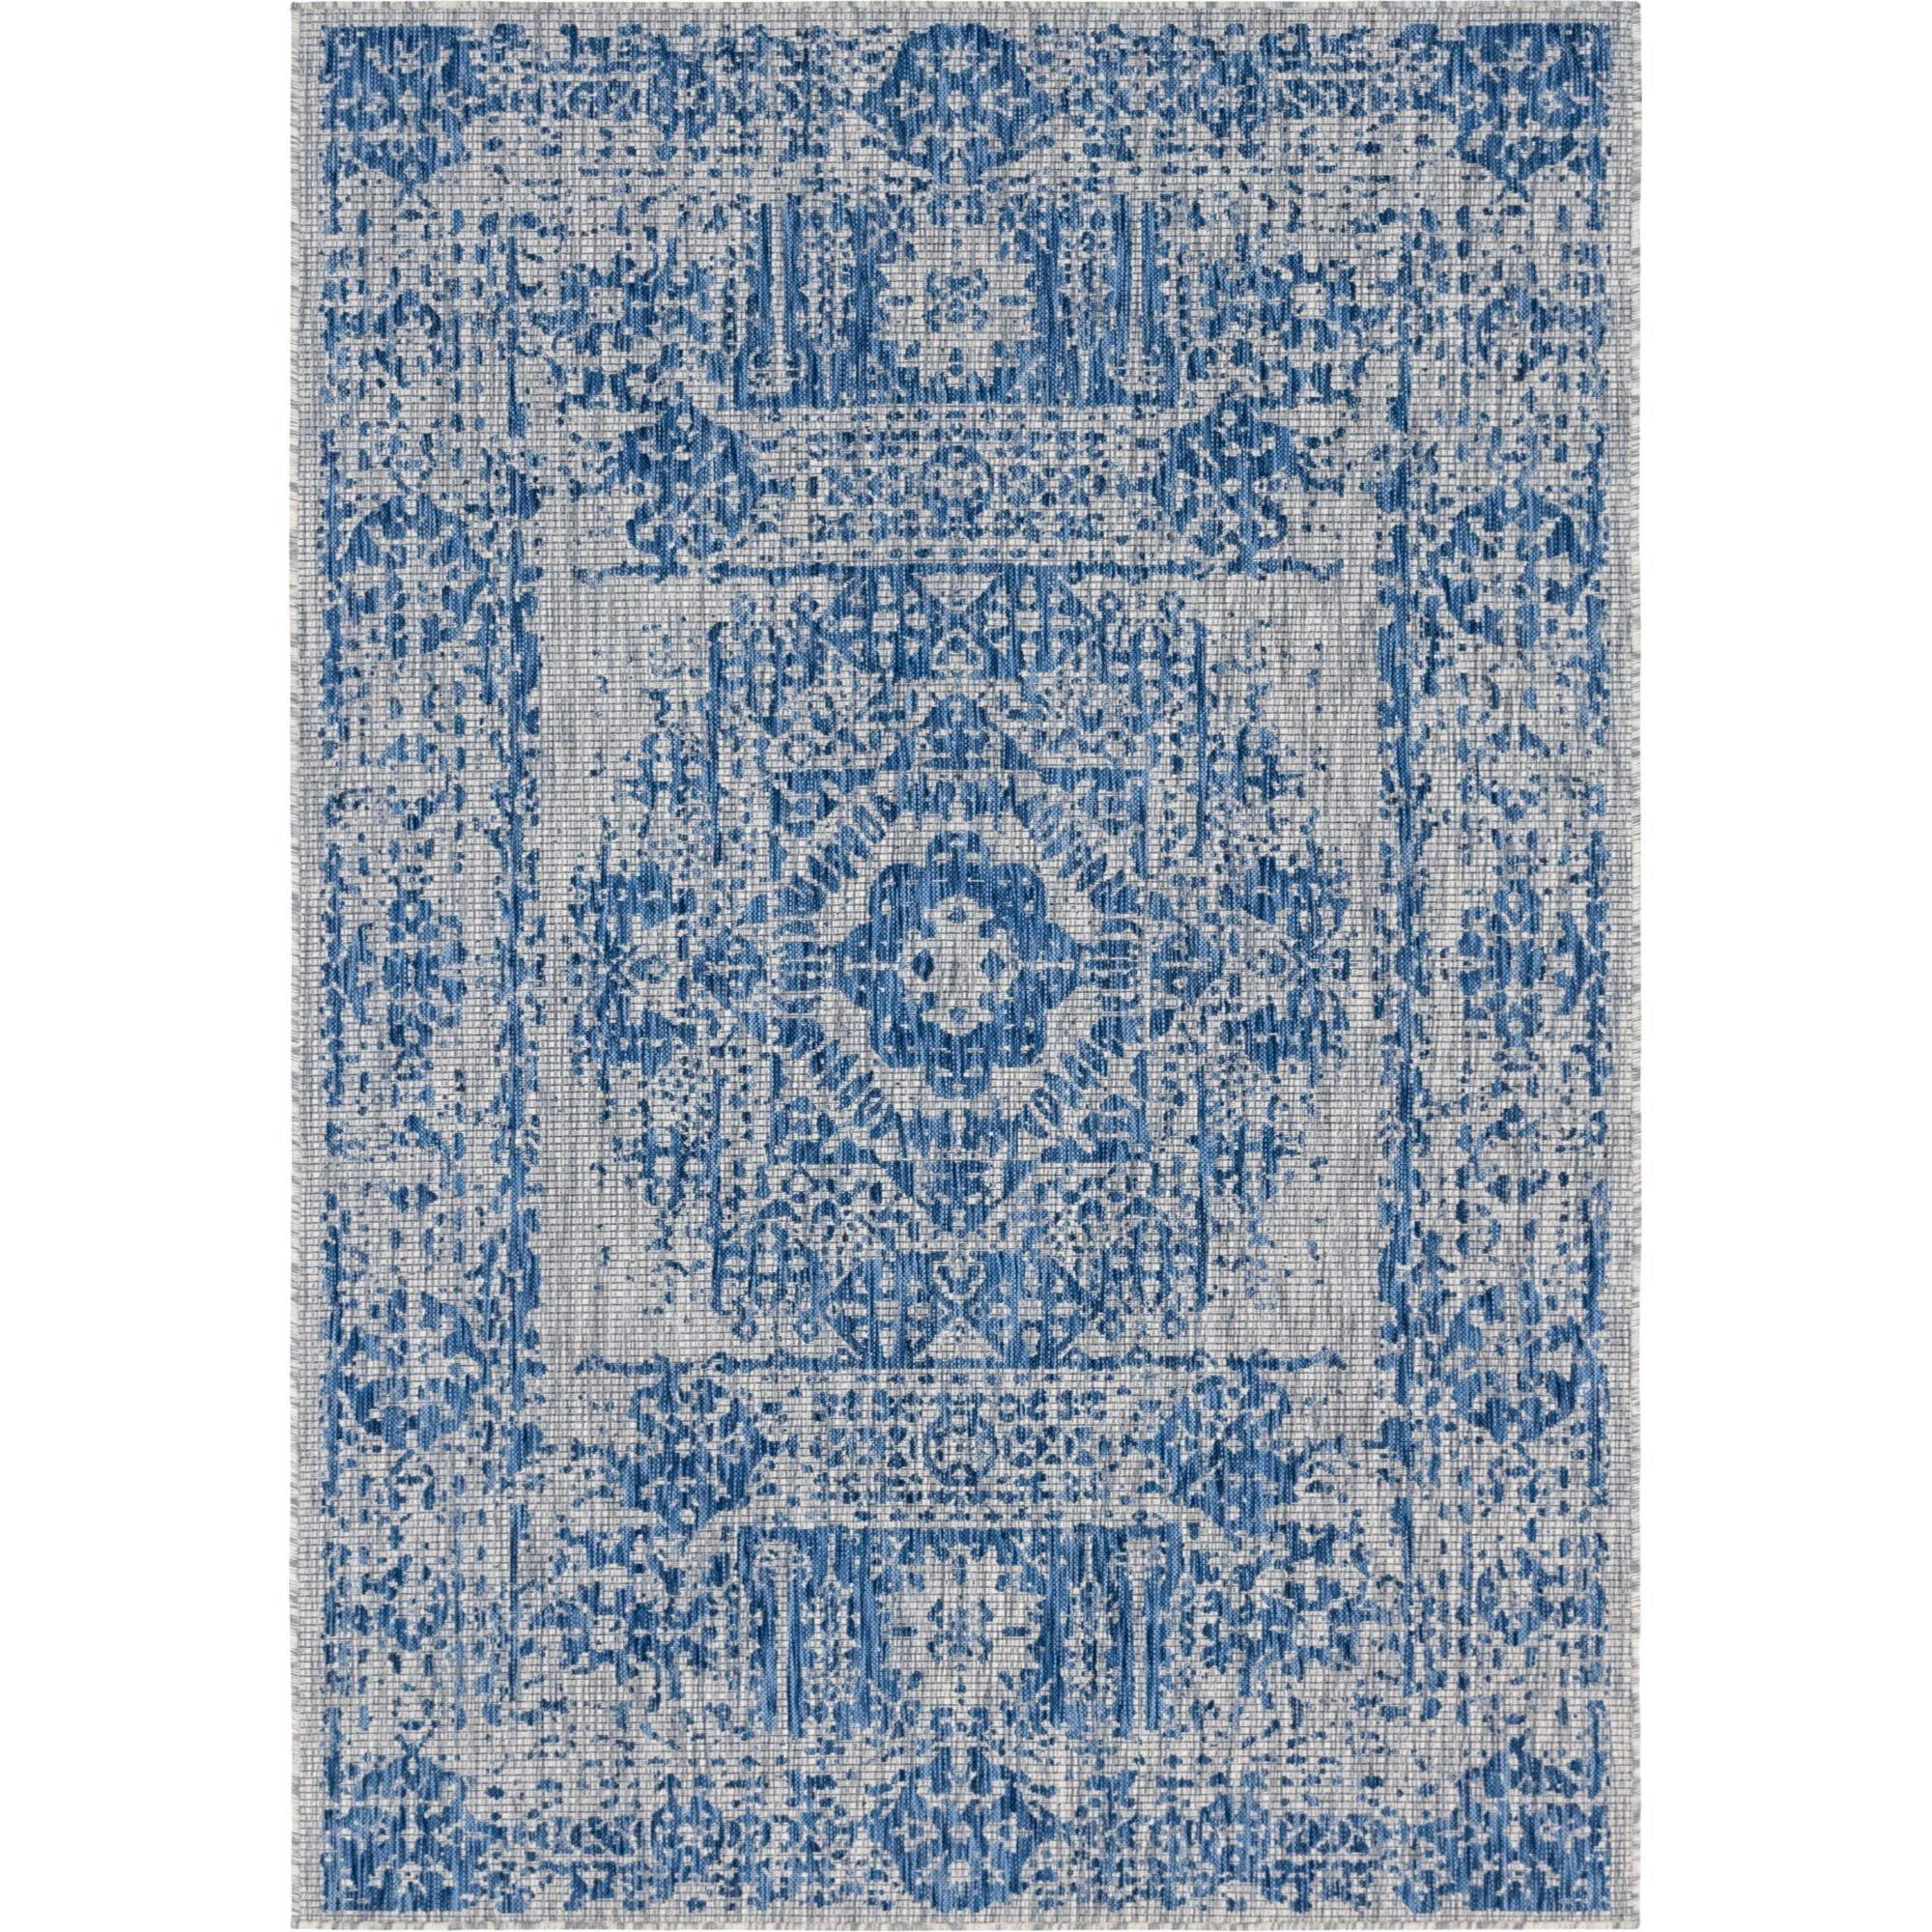 Elysian Blue 7' x 10' Flat Woven Synthetic Outdoor Rug